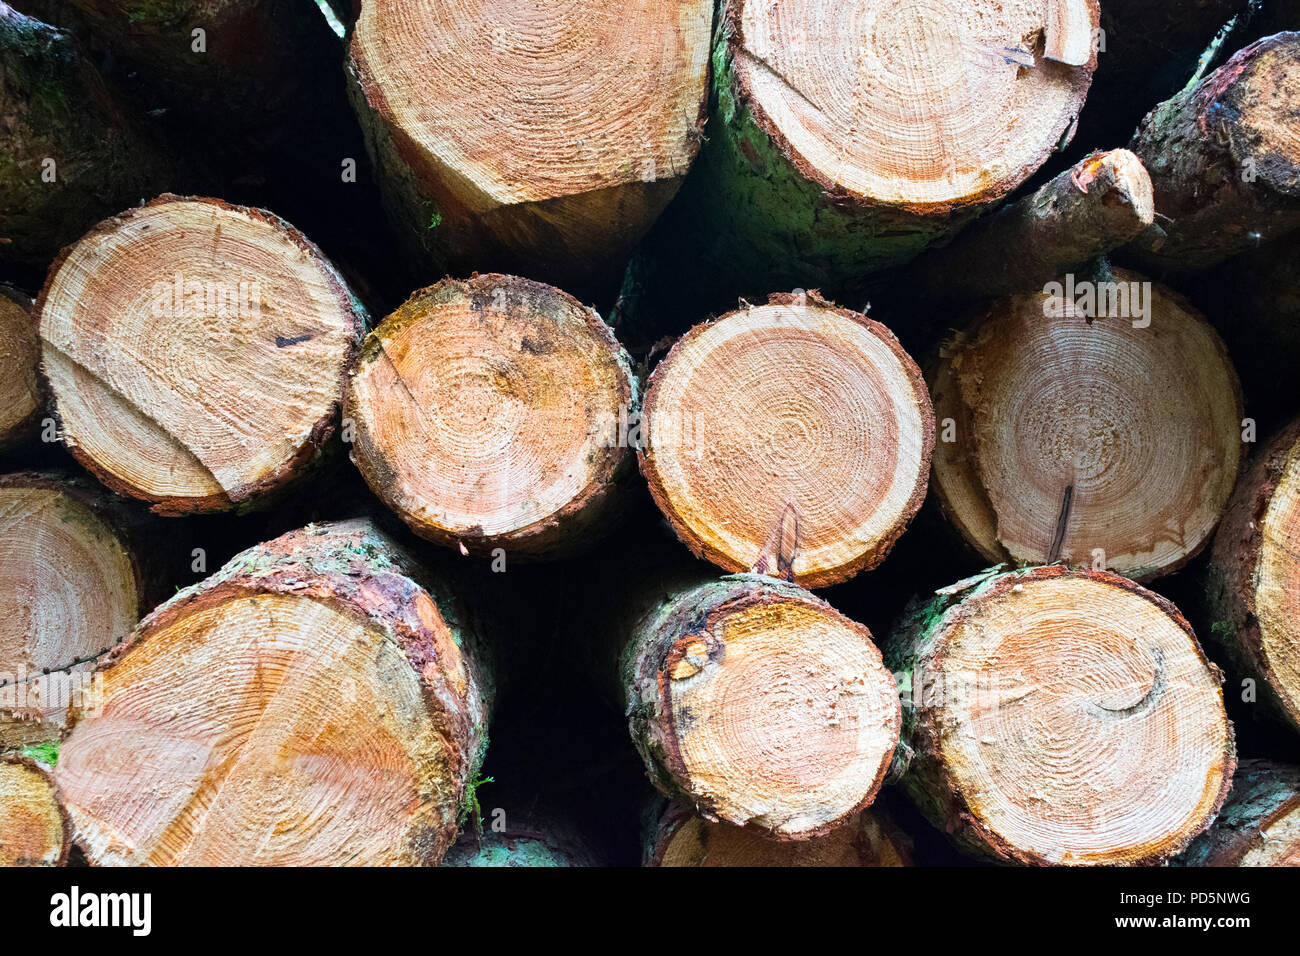 cut ends of a pile of sawn logs showing the tree rings Stock Photo